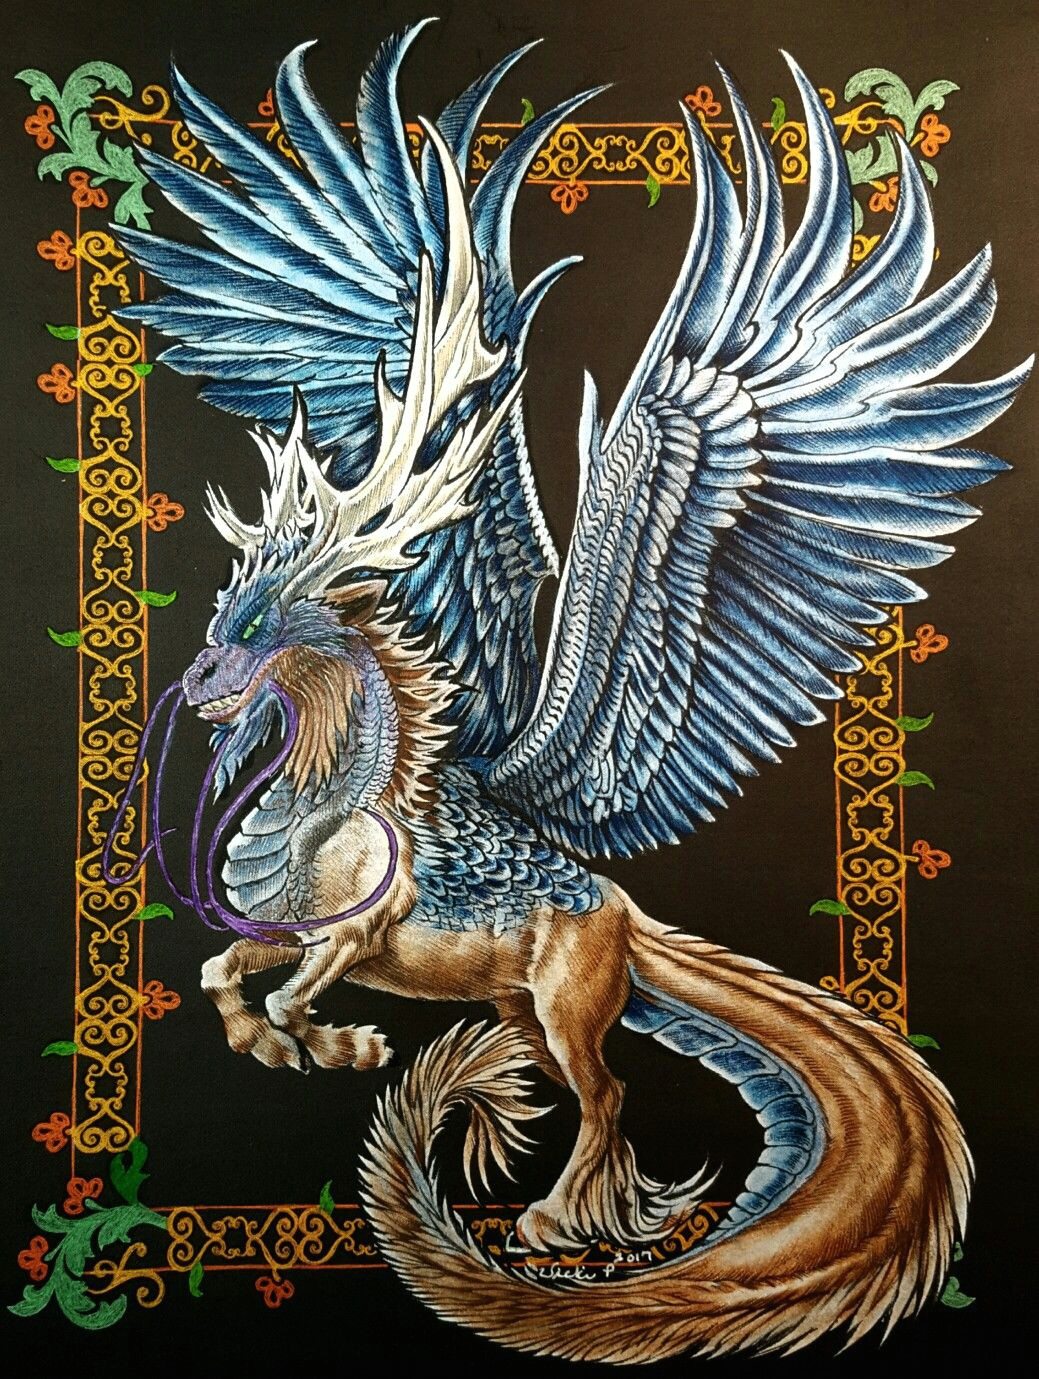 Colored Pencil Drawings Of Dragons Design by Bennett Klein Colored by Vicki Patterson Colorings by